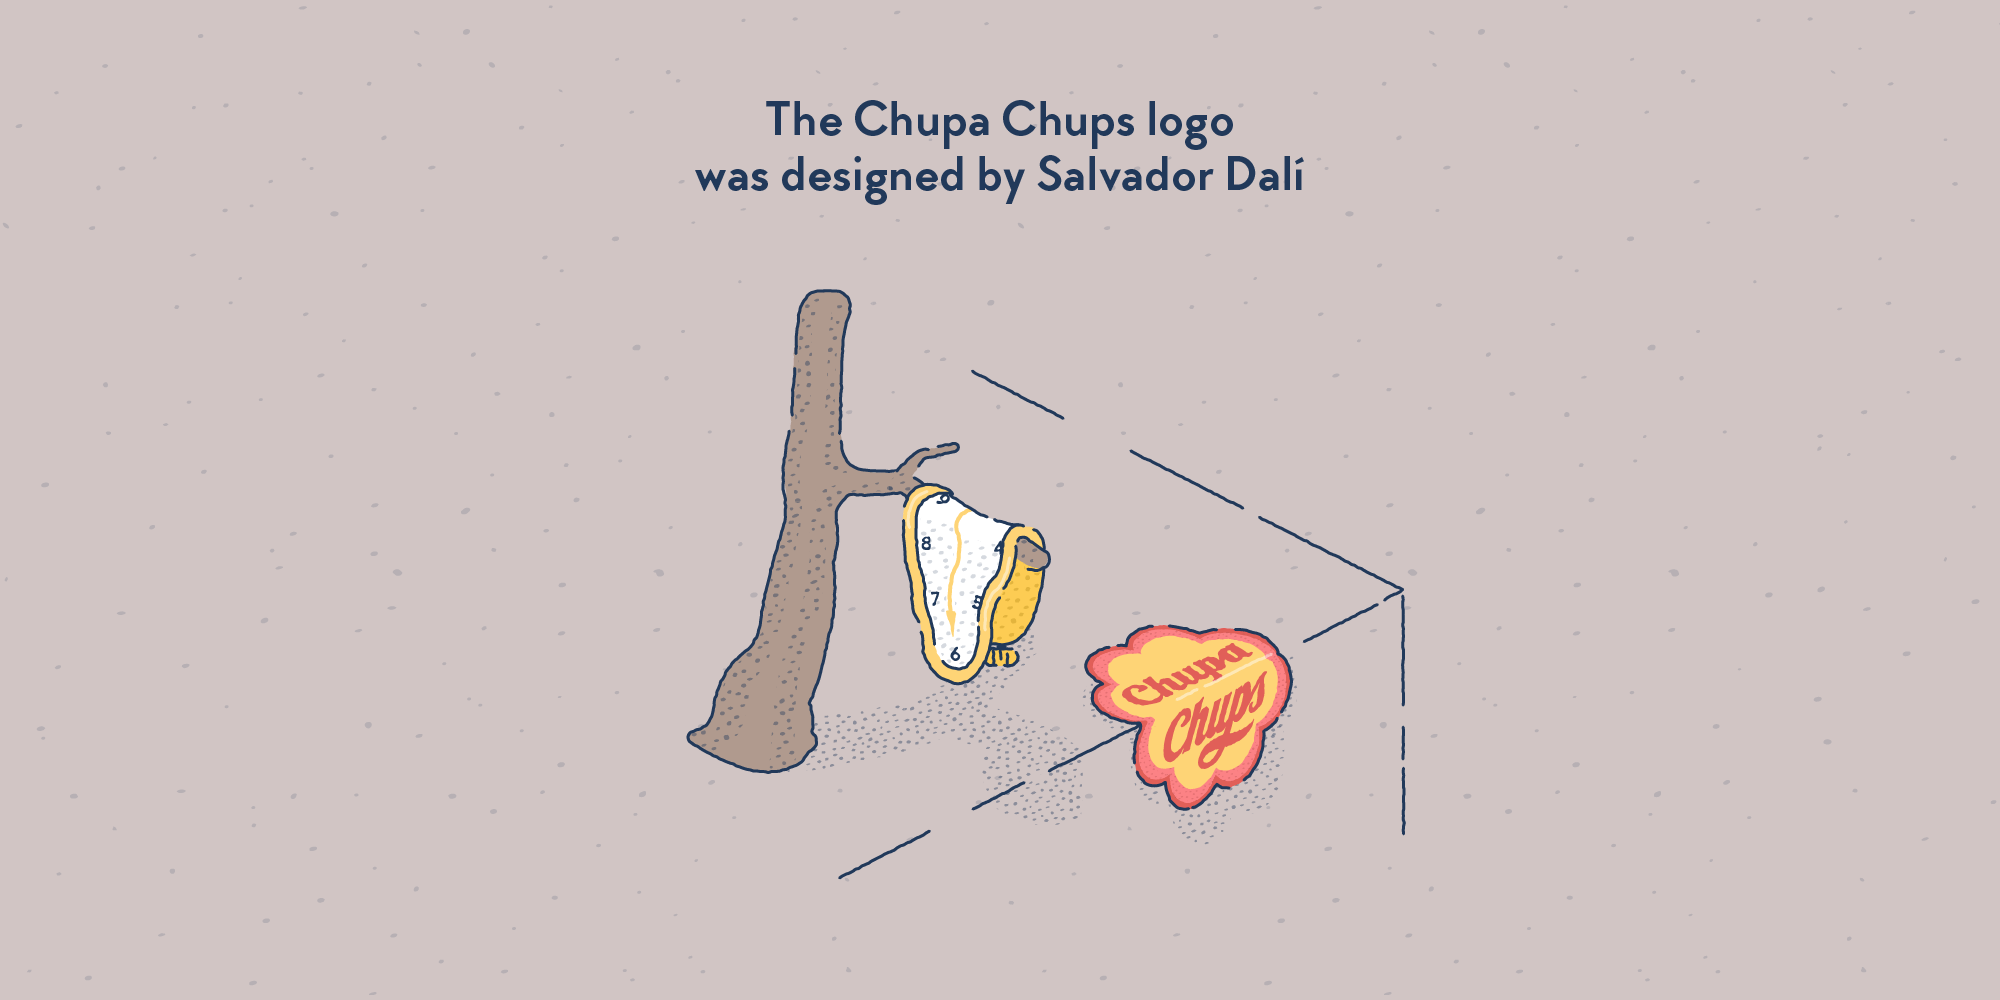 A visual reminding of Dalí’s painting “The Persistence of Memory”, in which pocket watches are melting in a landscape. Here one watch is replaced by the Chupa Chups logo.